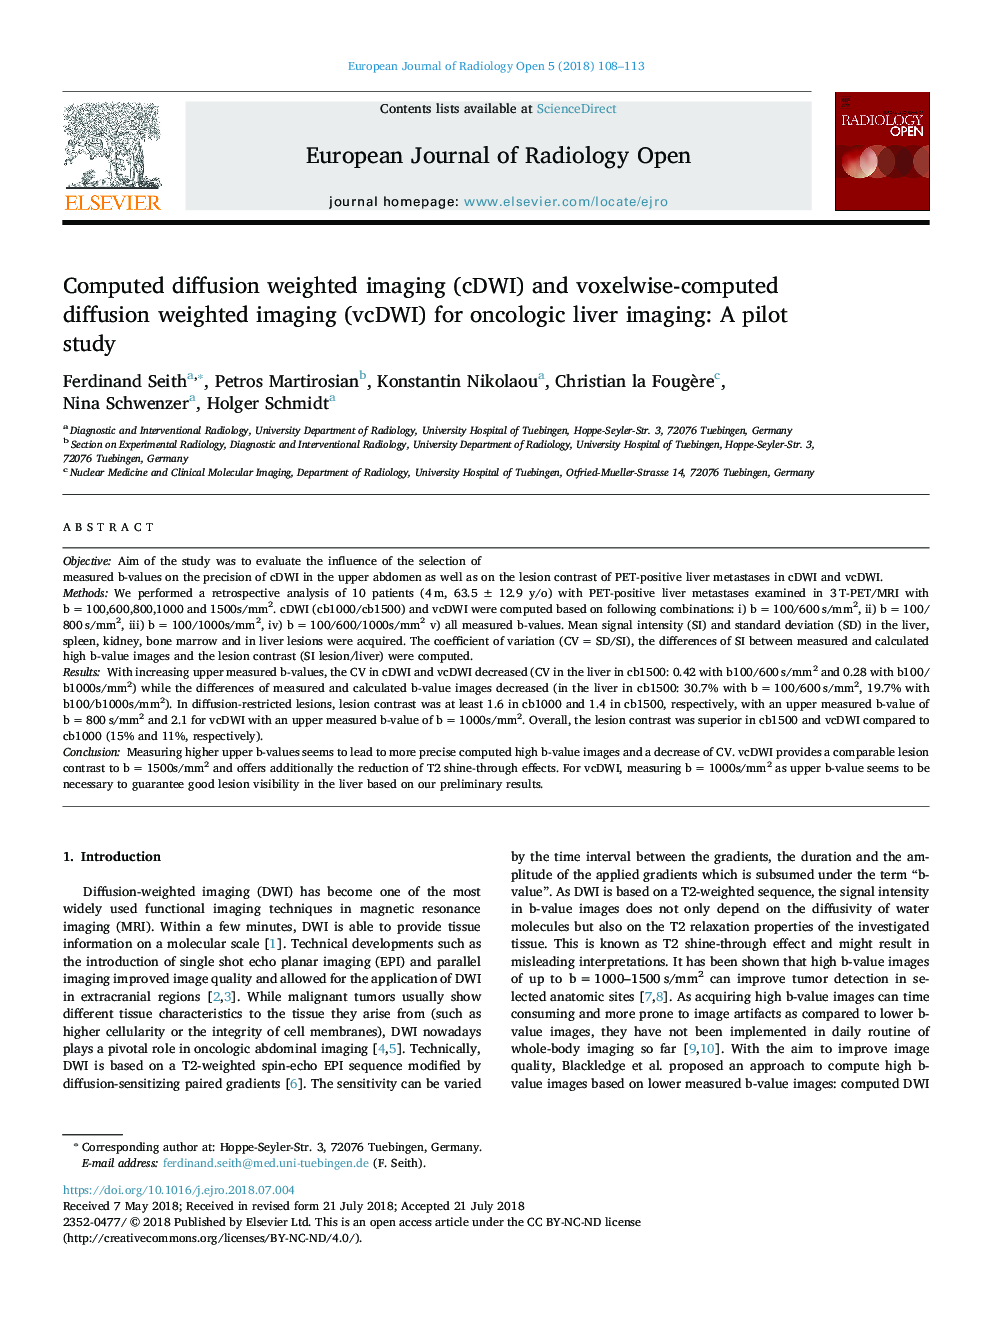 Computed diffusion weighted imaging (cDWI) and voxelwise-computed diffusion weighted imaging (vcDWI) for oncologic liver imaging: A pilot study